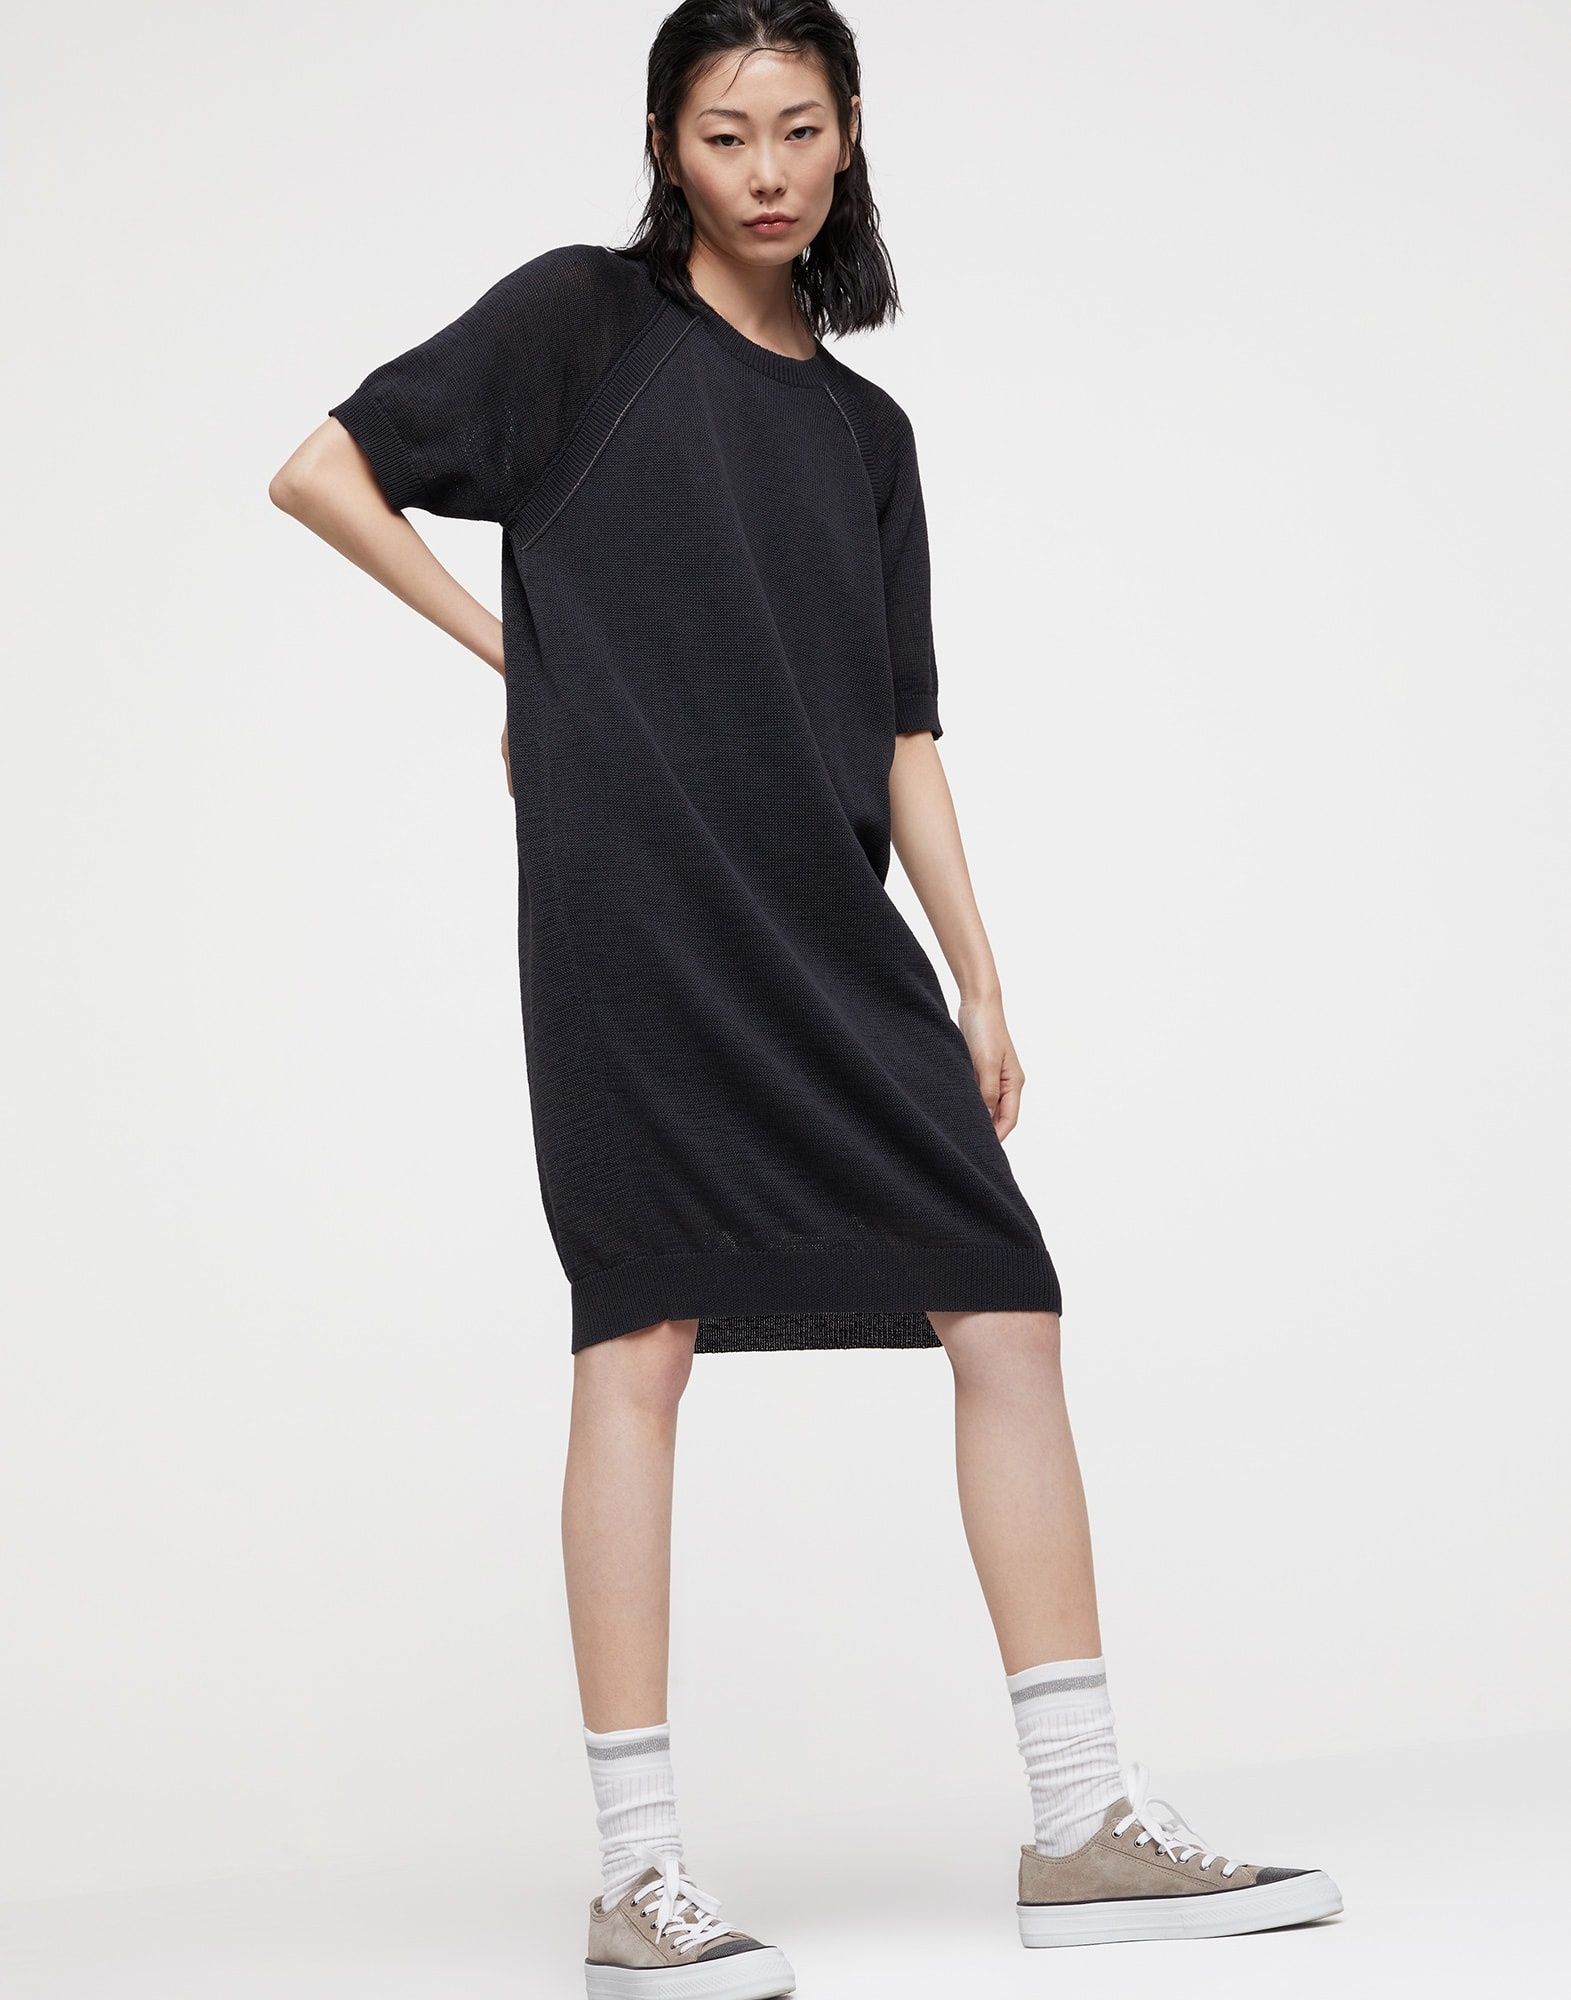 Cotton knit dress with shiny piping - 4